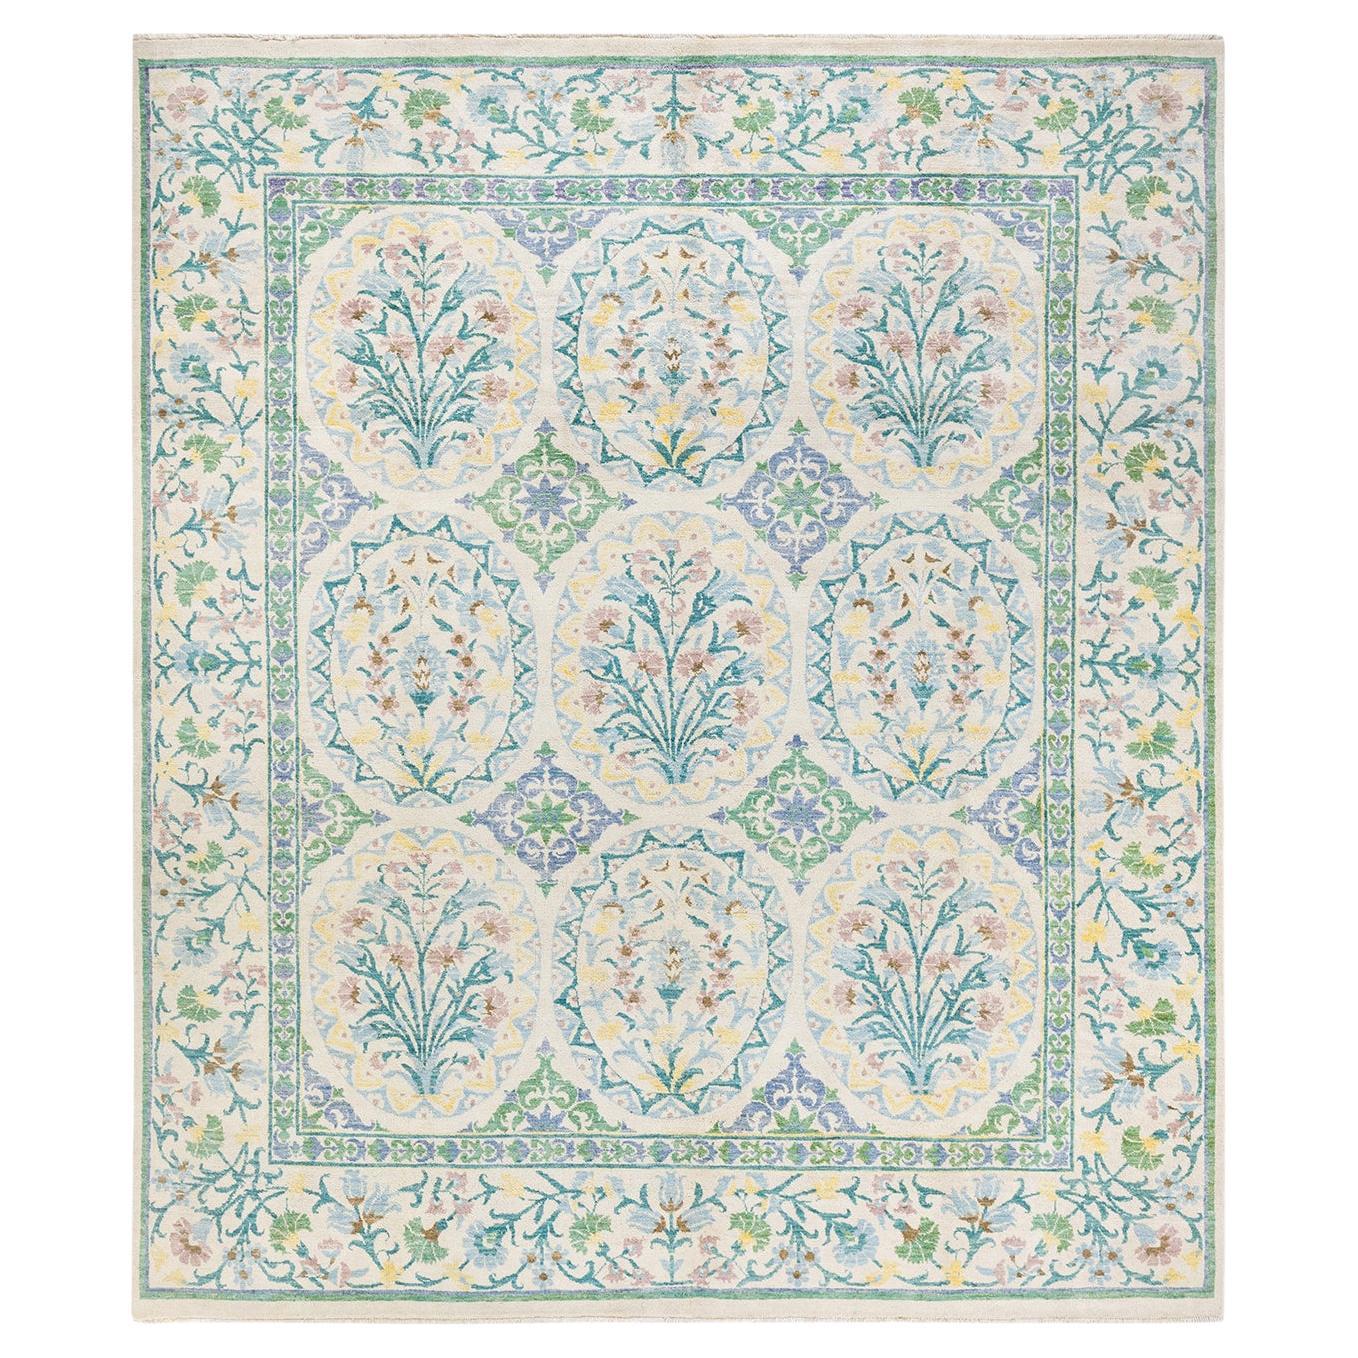 Contemporary Suzani Hand Knotted Wool Ivory Area Rug